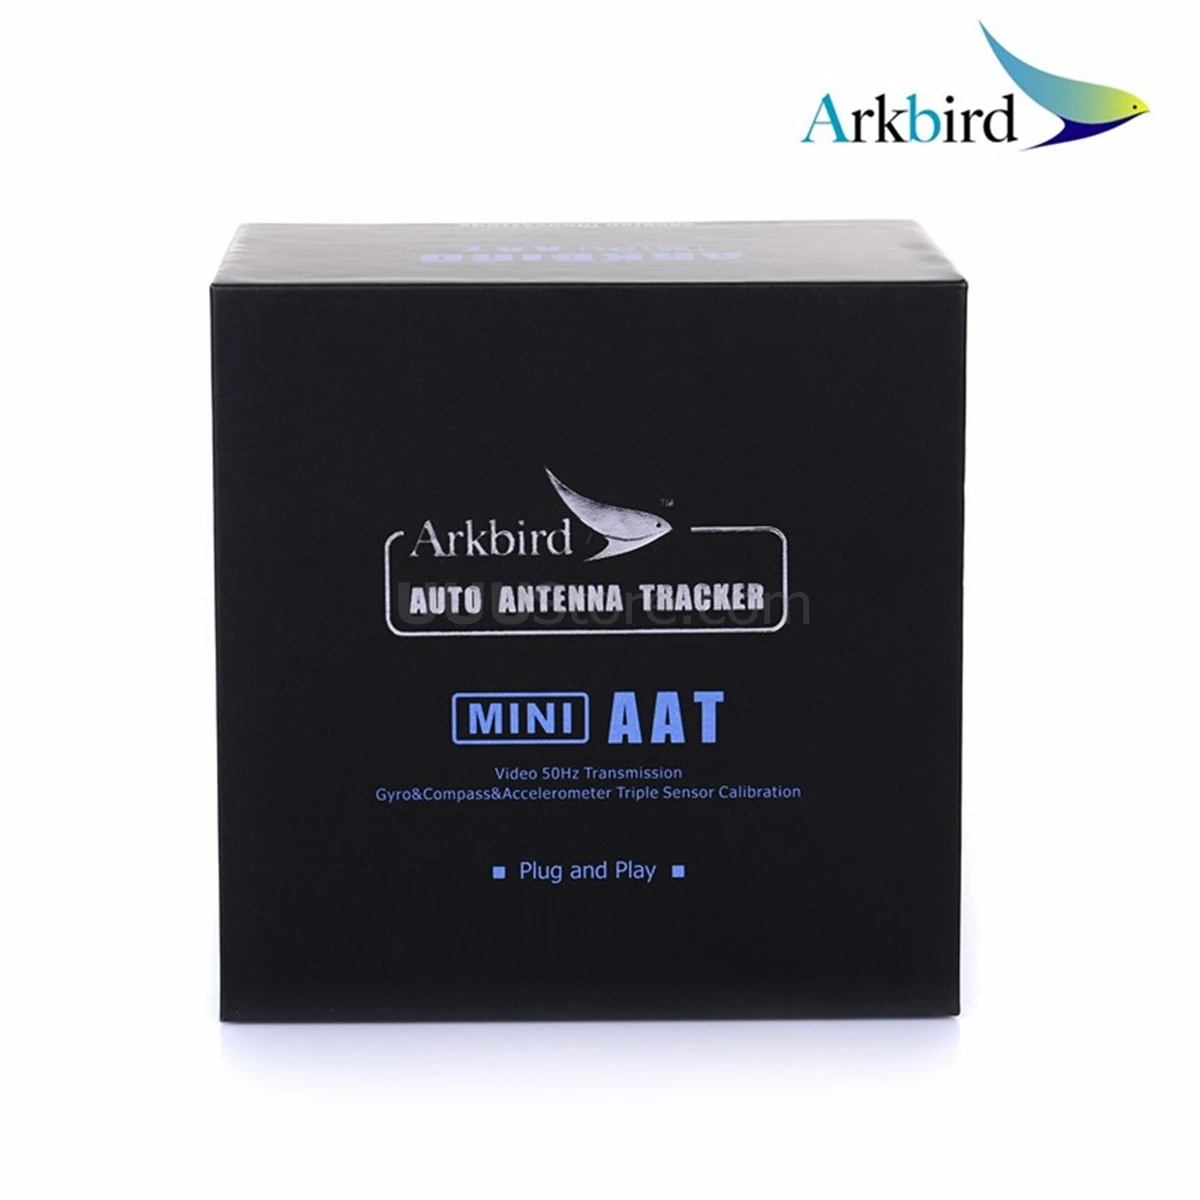 Arkbird Mini AAT Auto Antenna Tracker Gimbal FPV 5.8G Long Range System W/ Air Module Ground System Integrated Video Receiver 2